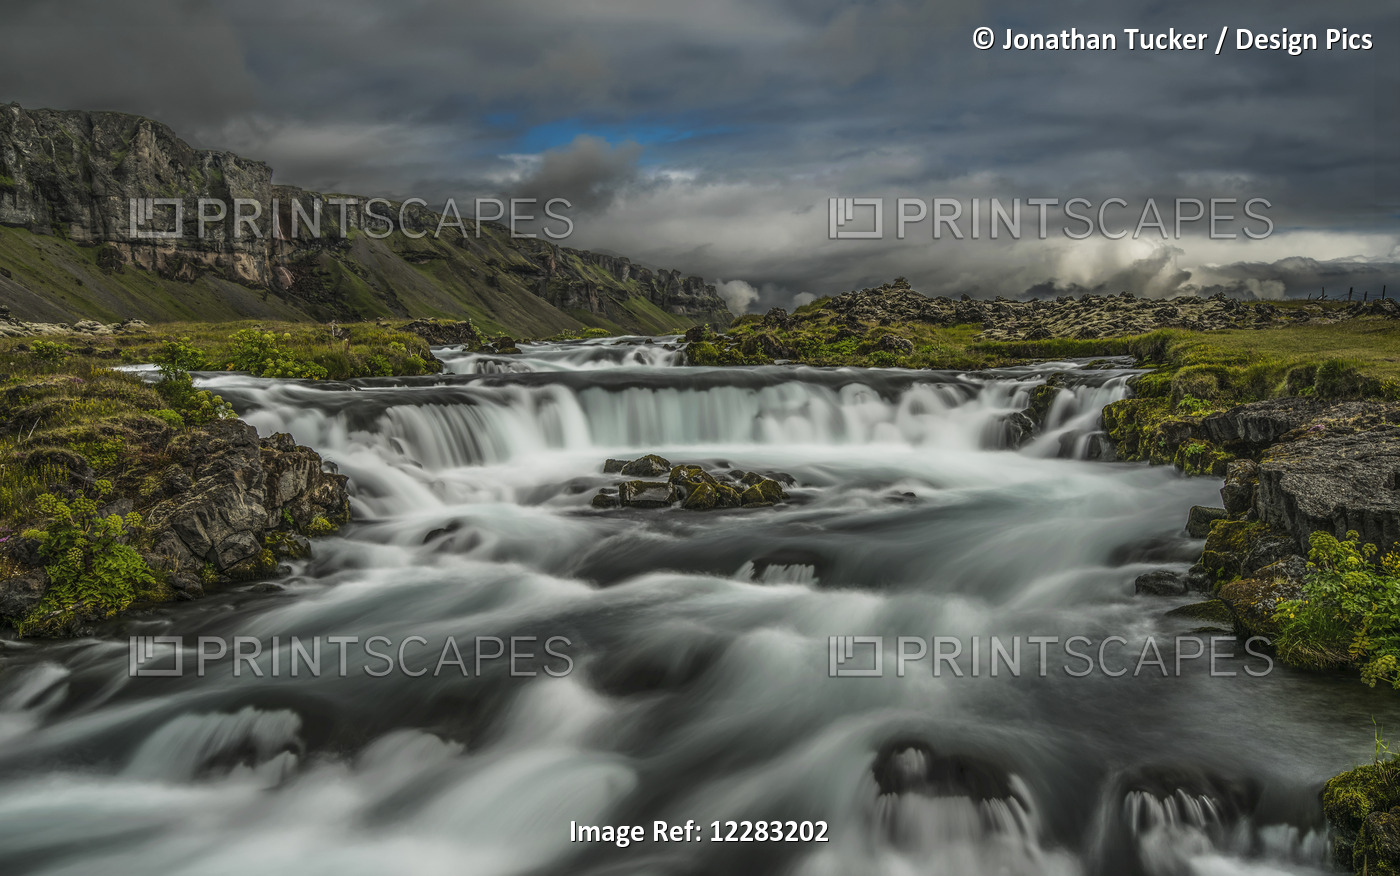 Water Flowing Over A Rugged Landscape Under A Cloudy Sky; Iceland